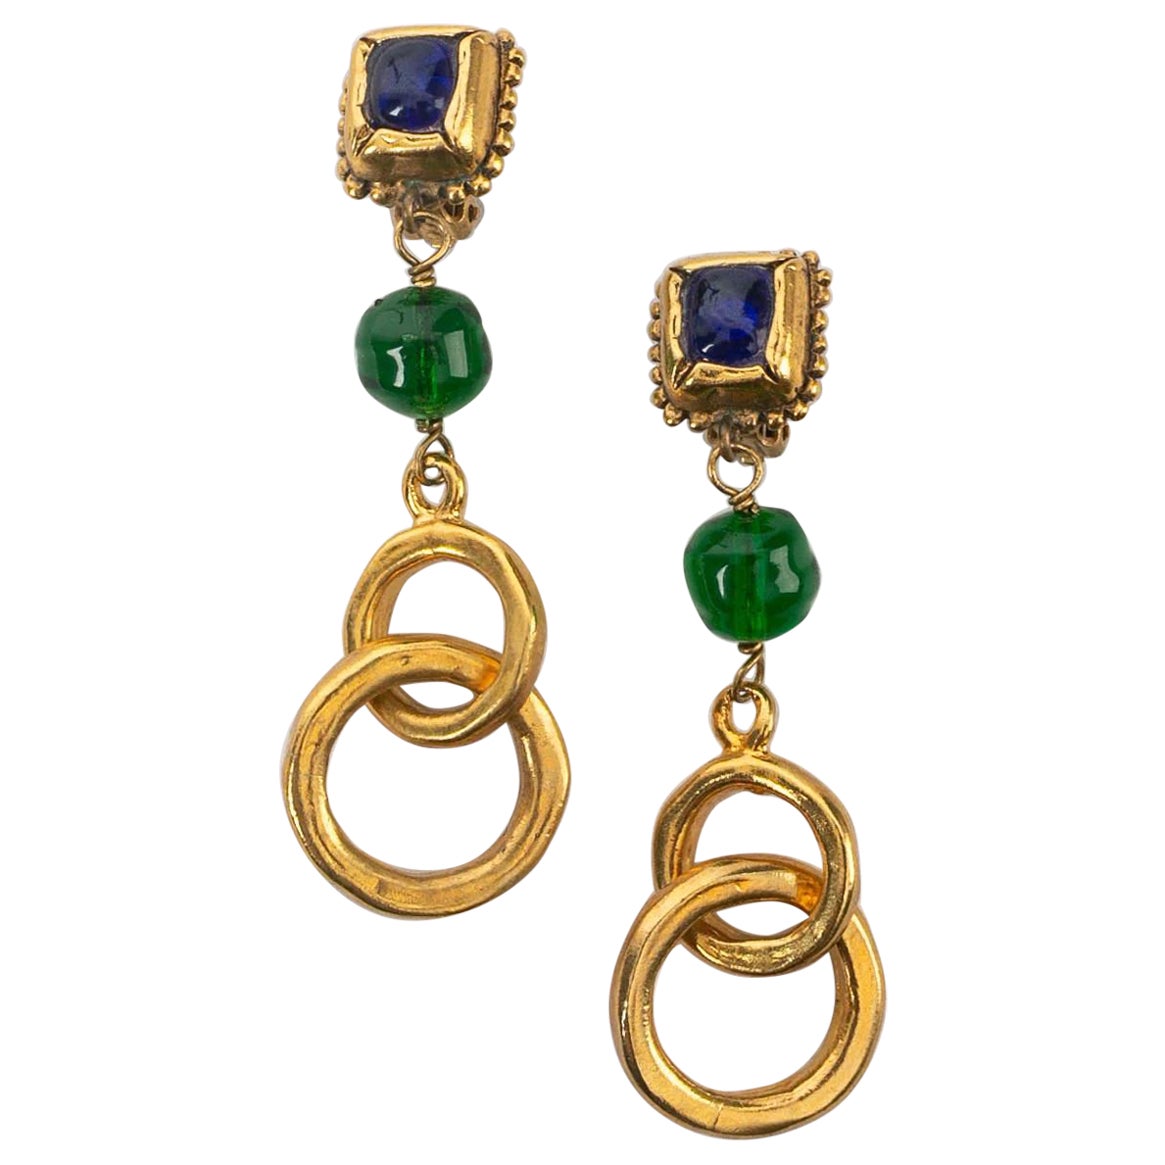 Chanel Drop Earrings in Gilded Metal and Glass Paste